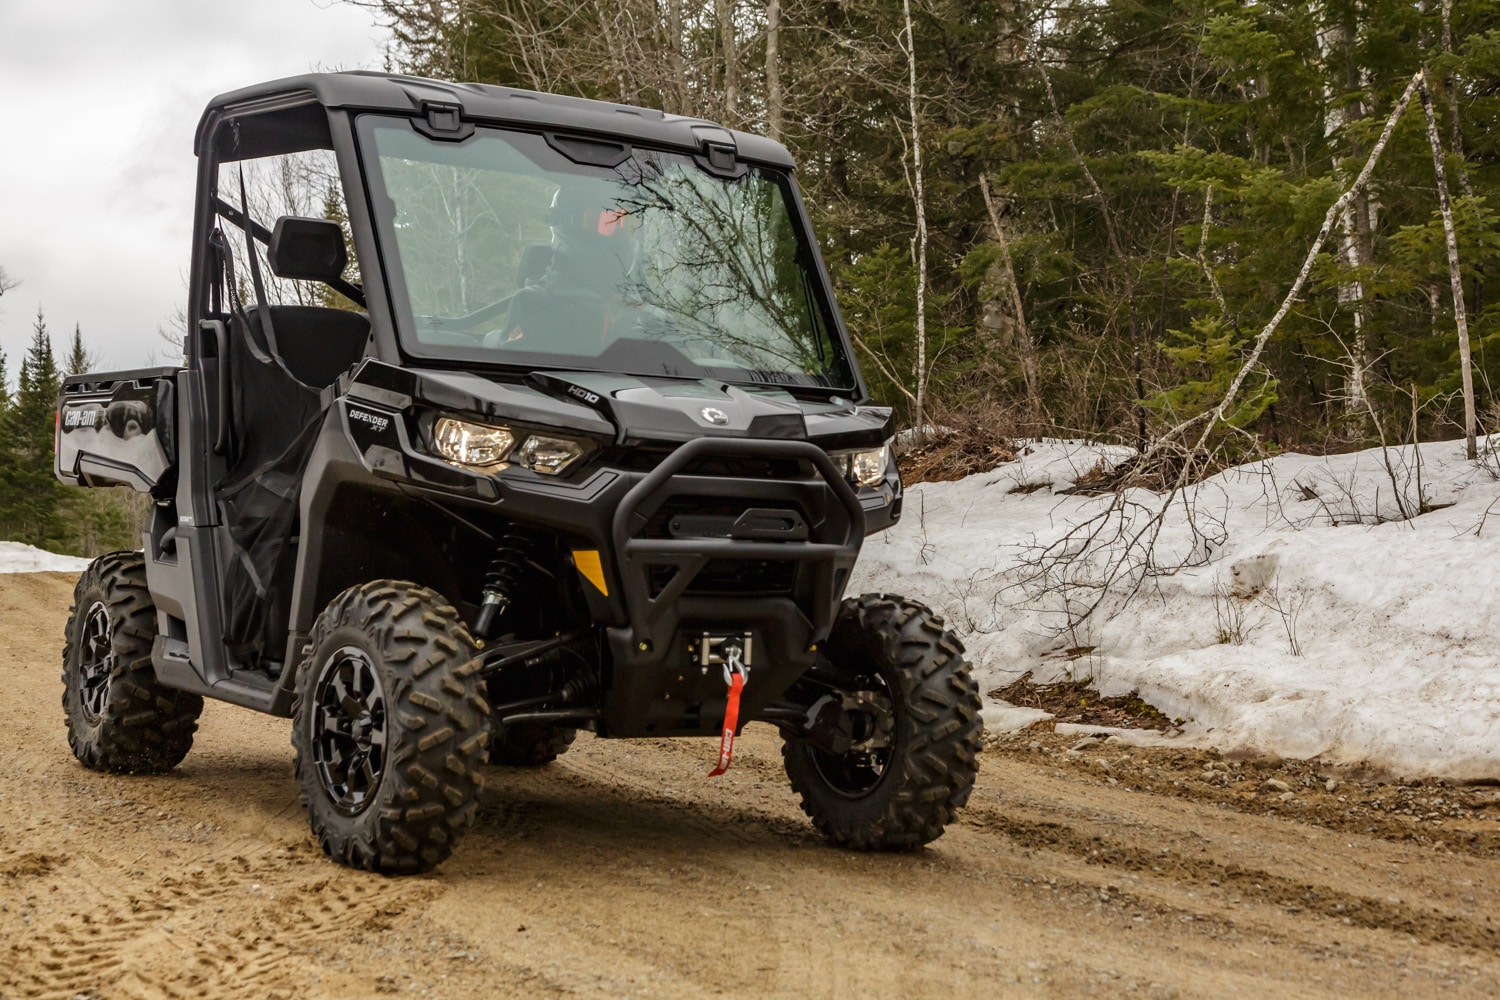 Can Am Defender XT HD10 2022 Test Ride 18 of 39 Can-Am Defender XT HD10 2022 – Test Ride